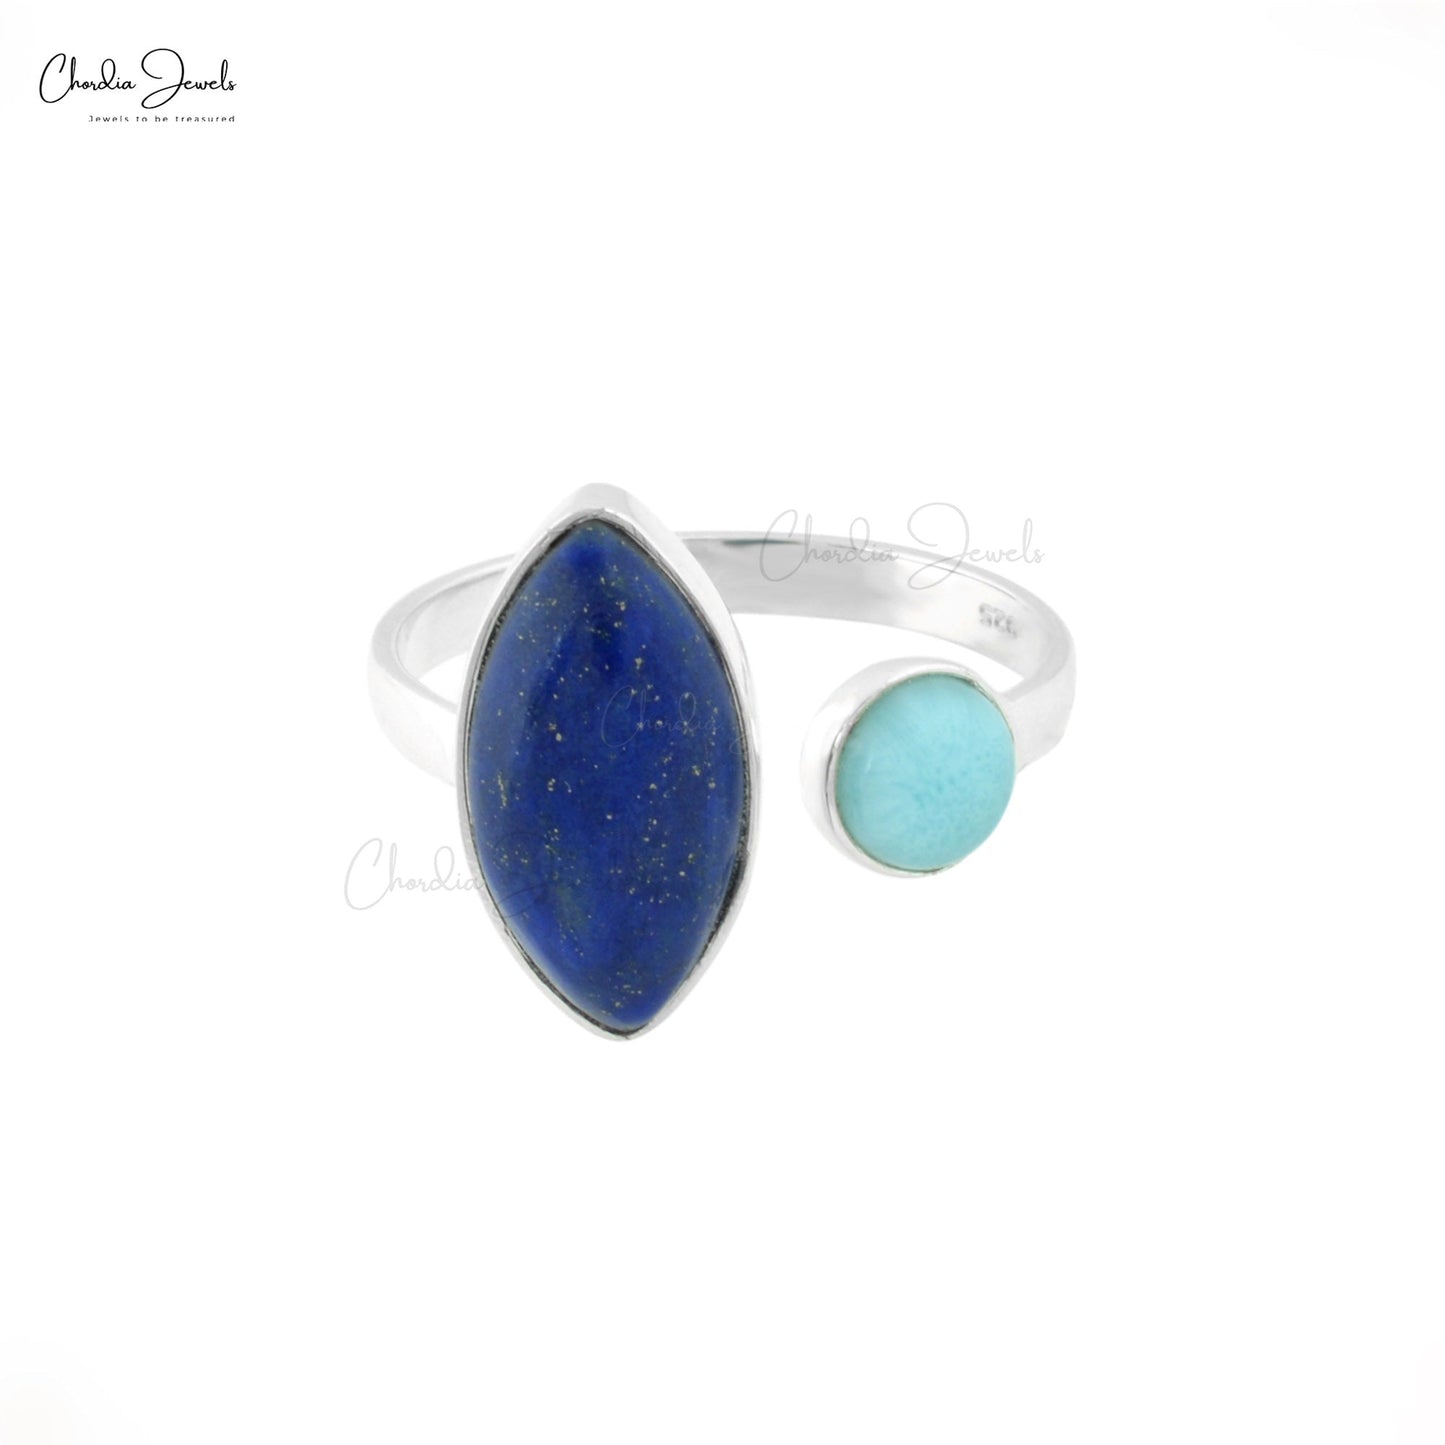 High Quality 925 Sterling Silver Lapiz-Lazuli and Turquoise Open Cuff Gemstone Ring At Discount Price